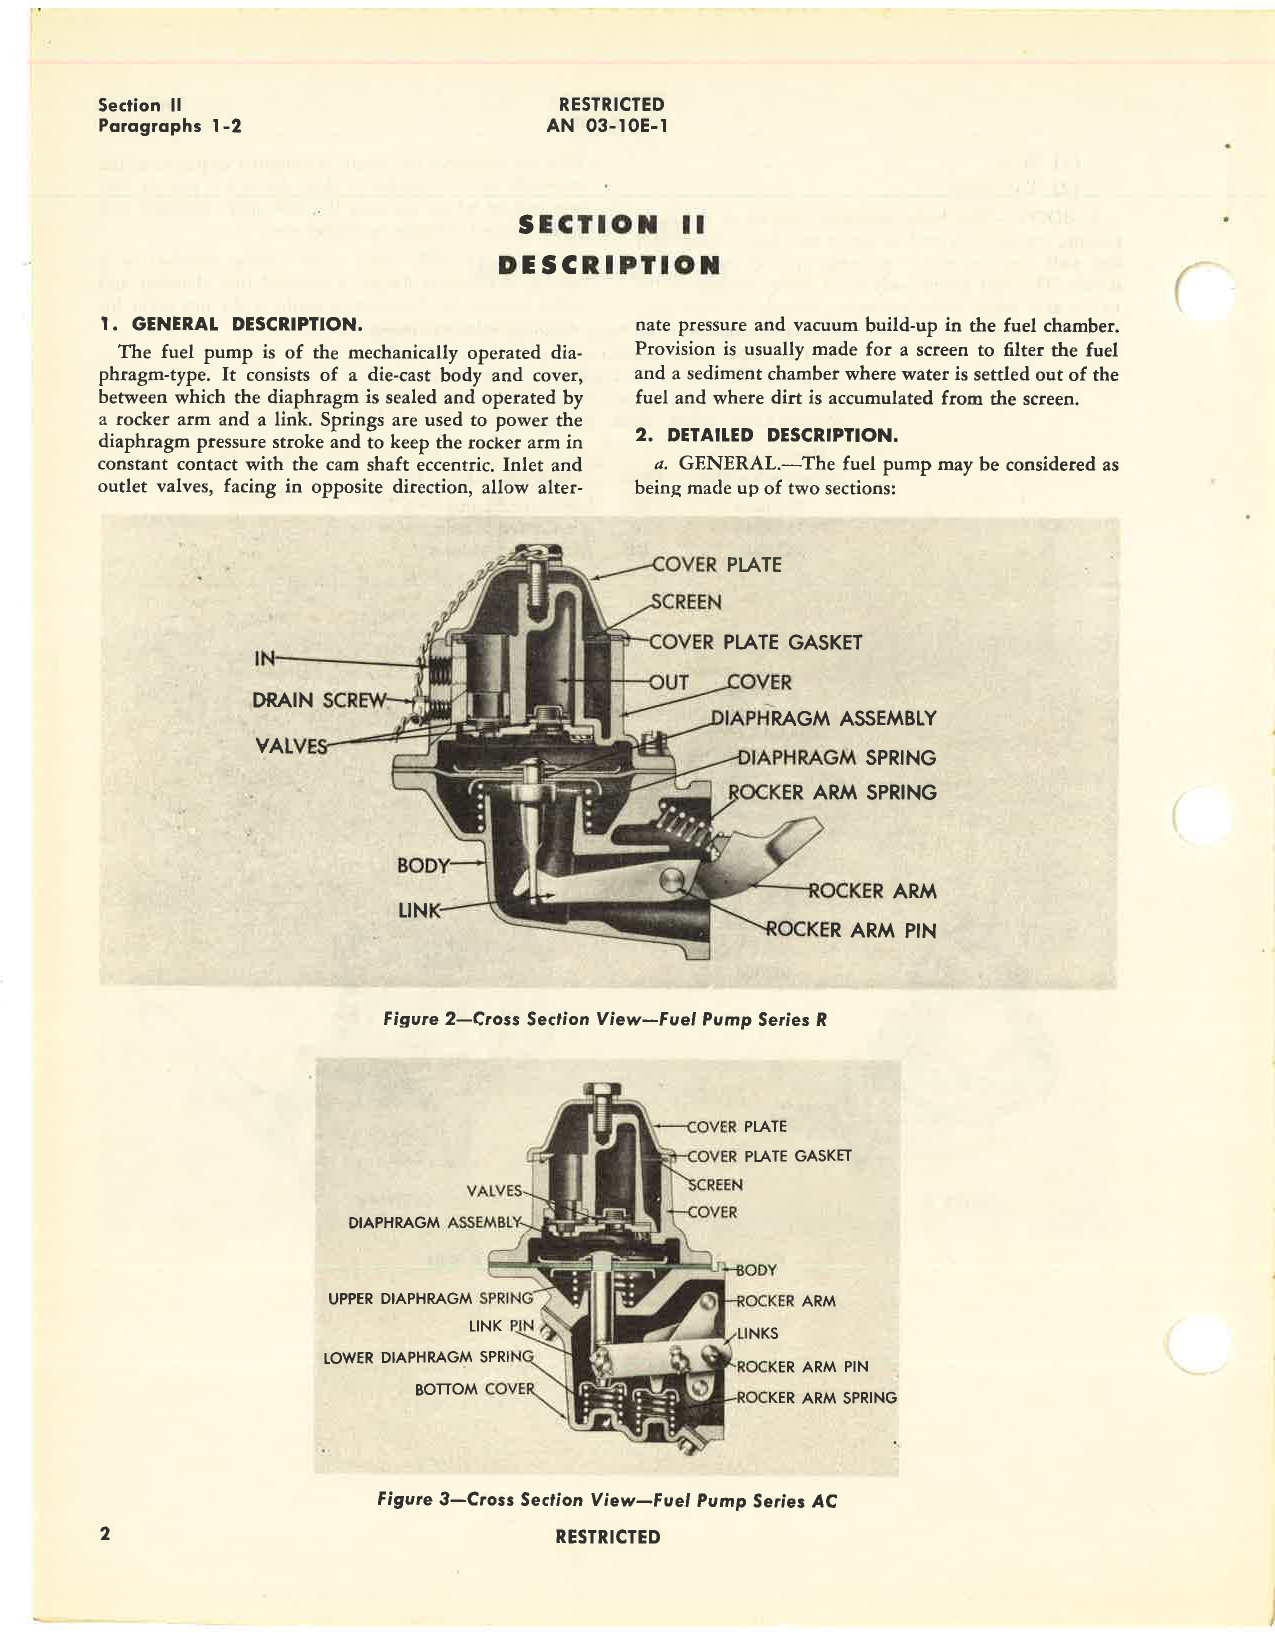 Sample page 6 from AirCorps Library document: Handbook of Instructions with Parts Catalog for Types AC, BF, and R Fuel Pumps